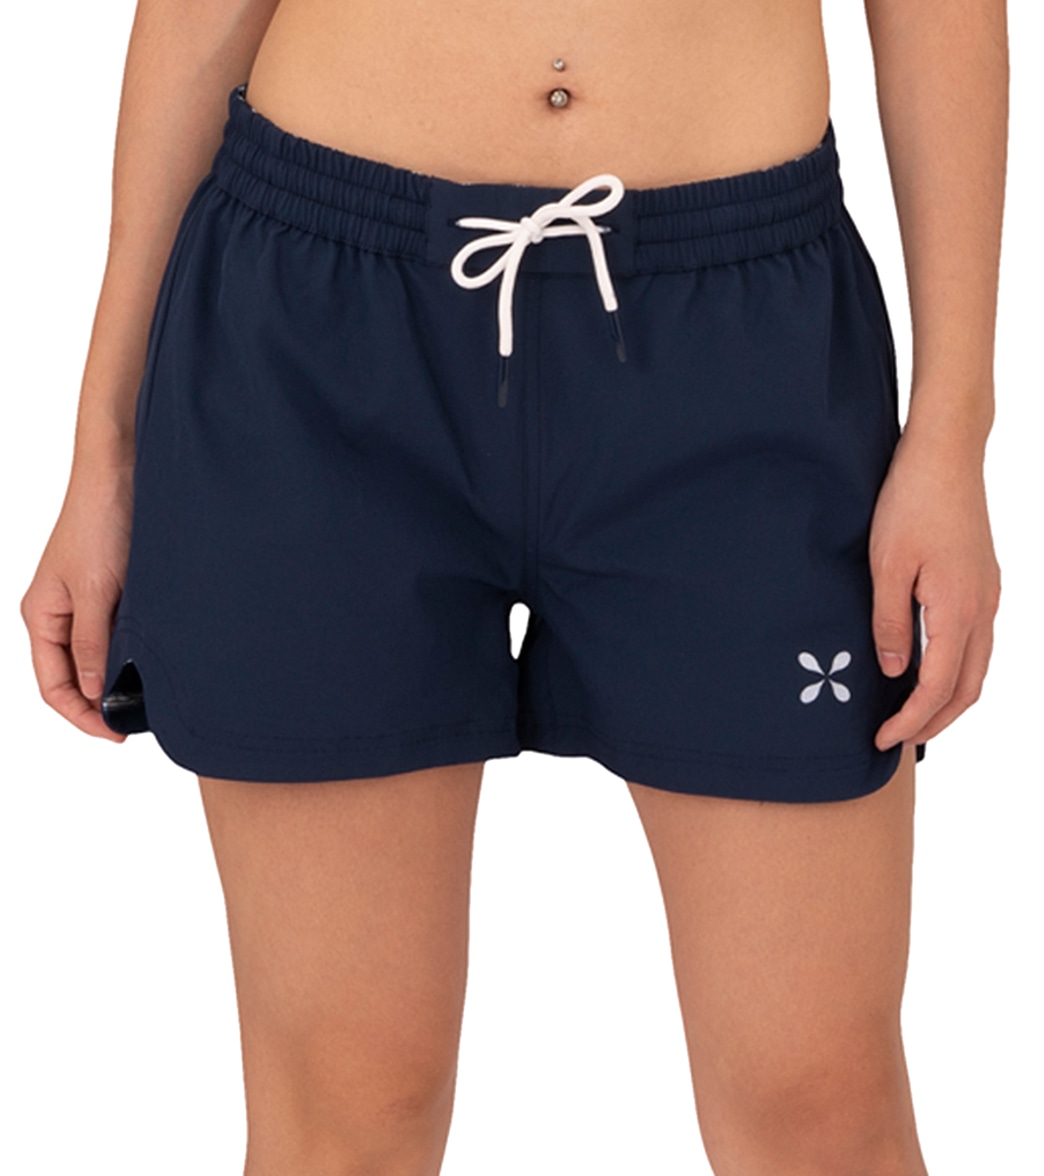 Level Six Women's Switched Reversible Short - Navy 6 - Swimoutlet.com